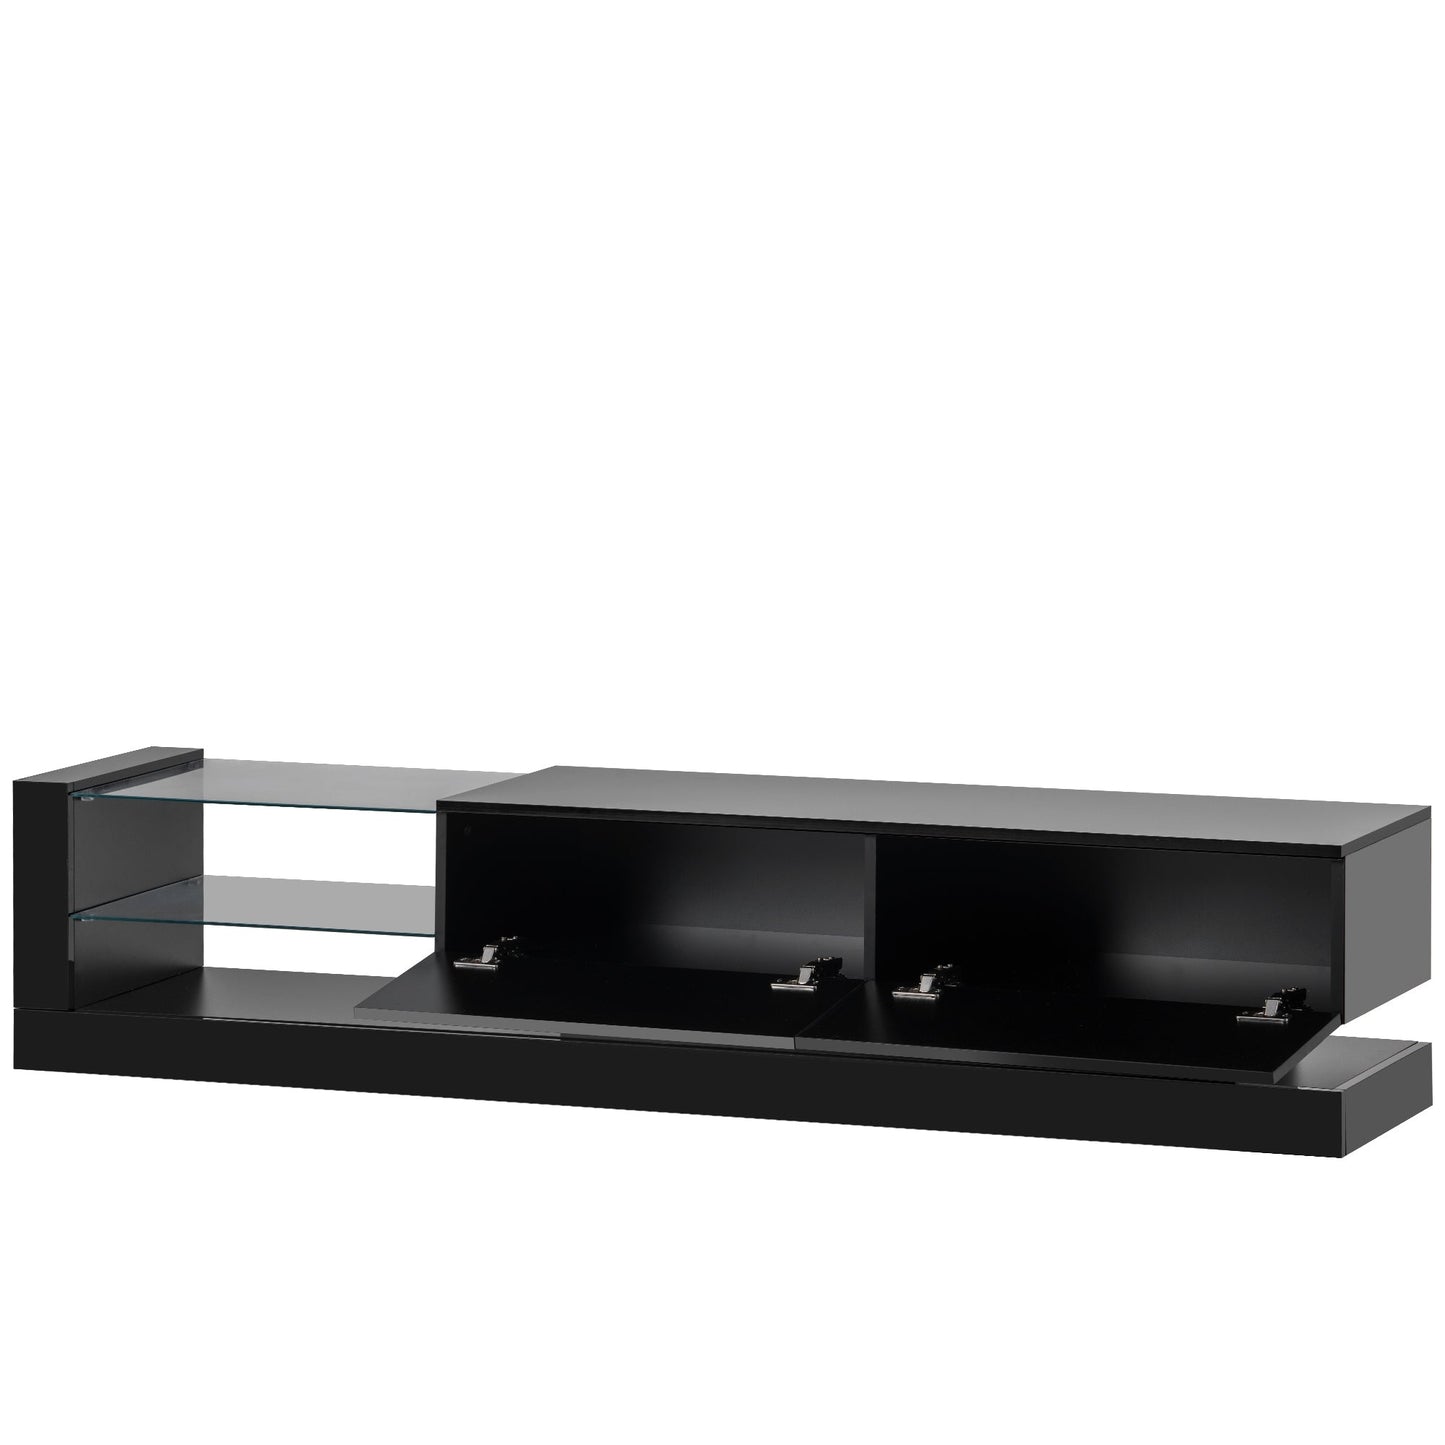 Pesaro Modern High Gloss Black Entertainment Center for 75 Inch TV, 16-color RGB LED Color Changing Lights